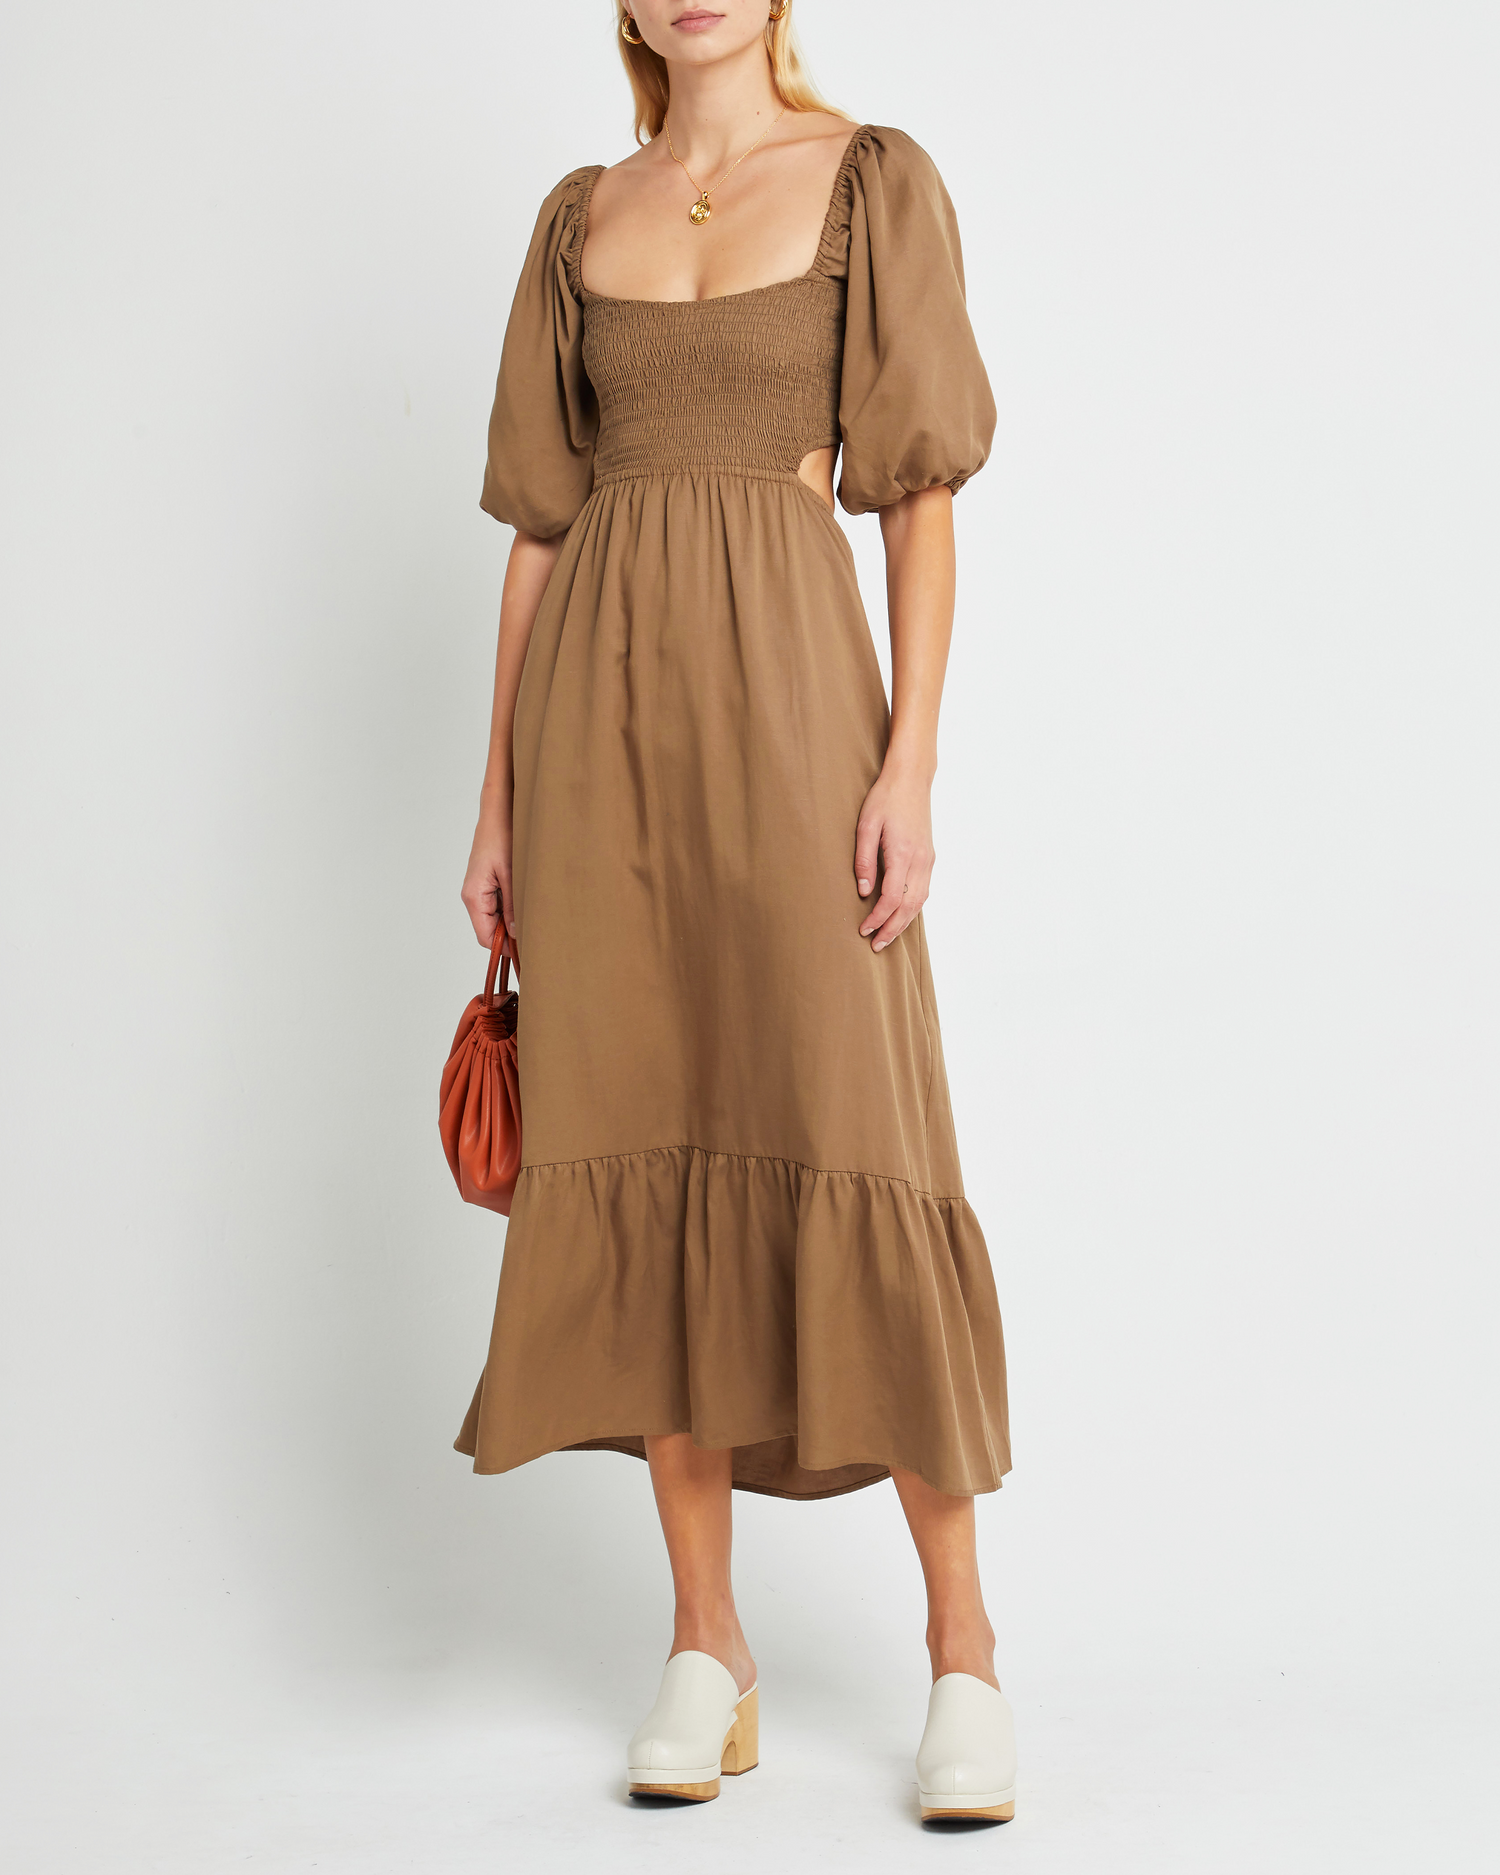 Fourth image of Leighton Dress, a  maxi dress, open back, cut outs, puff sleeves, short sleeves